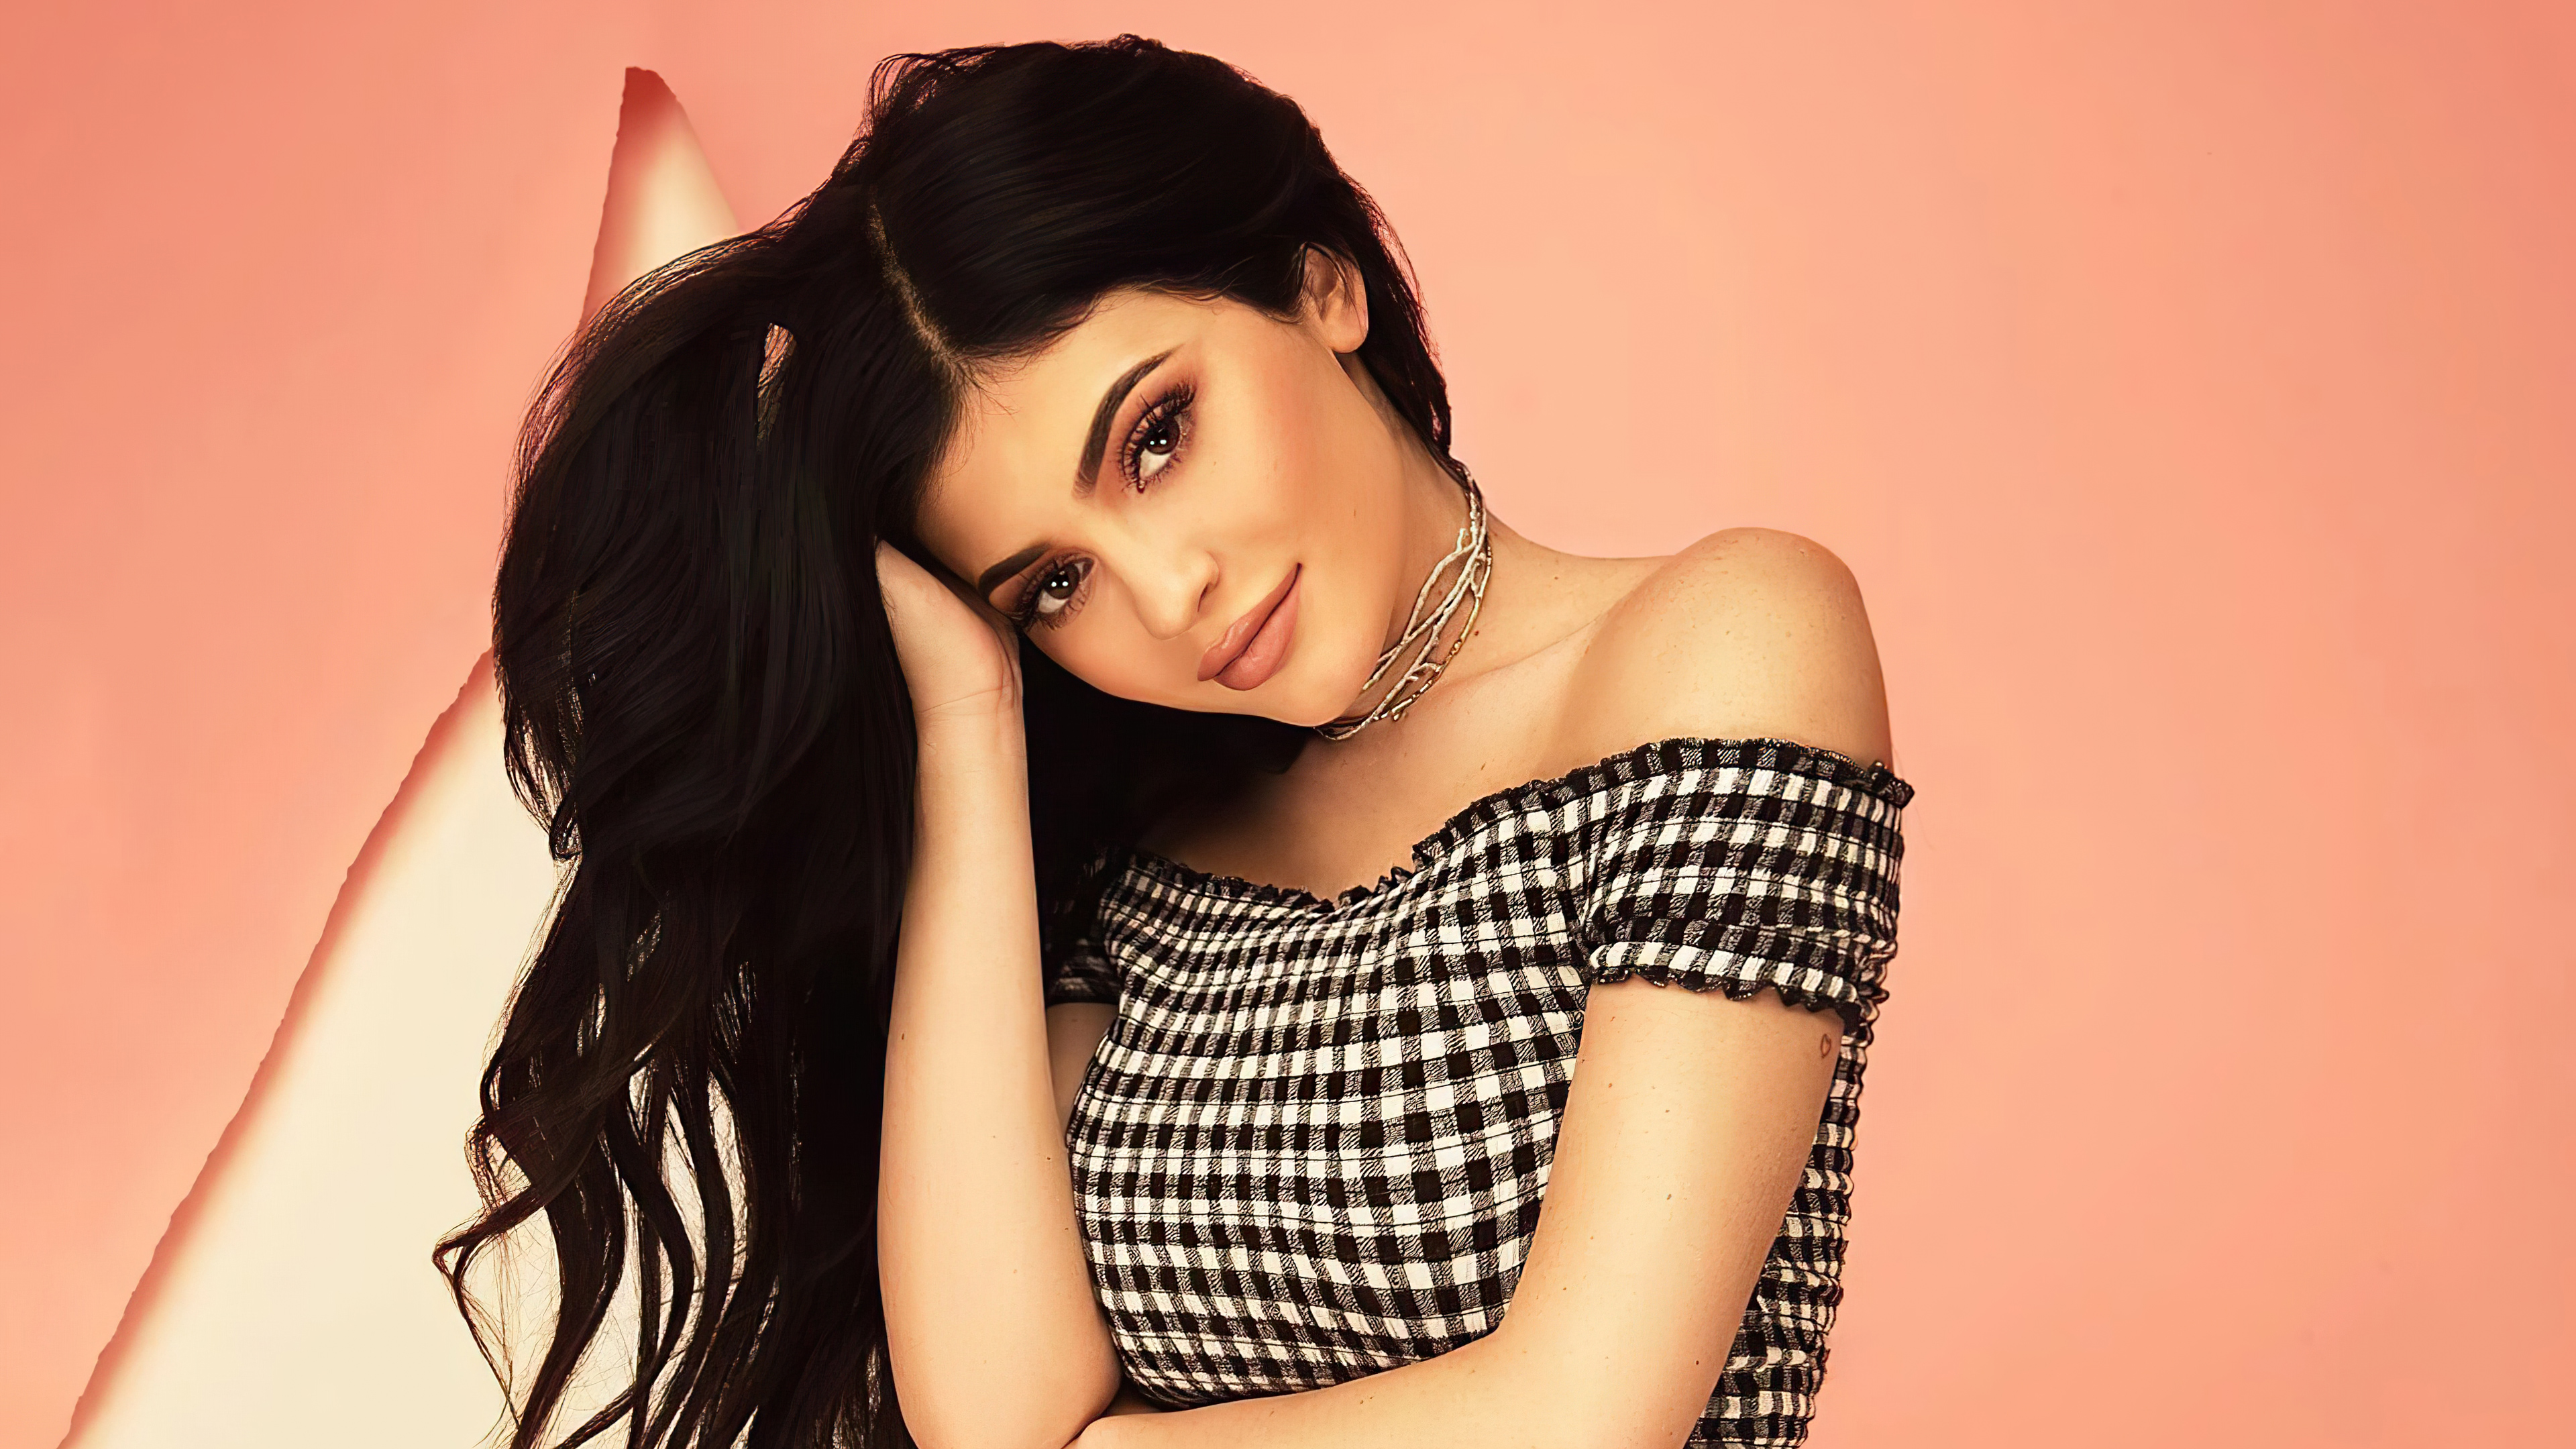 Kylie Jenner 2020 4k Laptop HD HD 4k Wallpaper, Image, Background, Photo and Picture